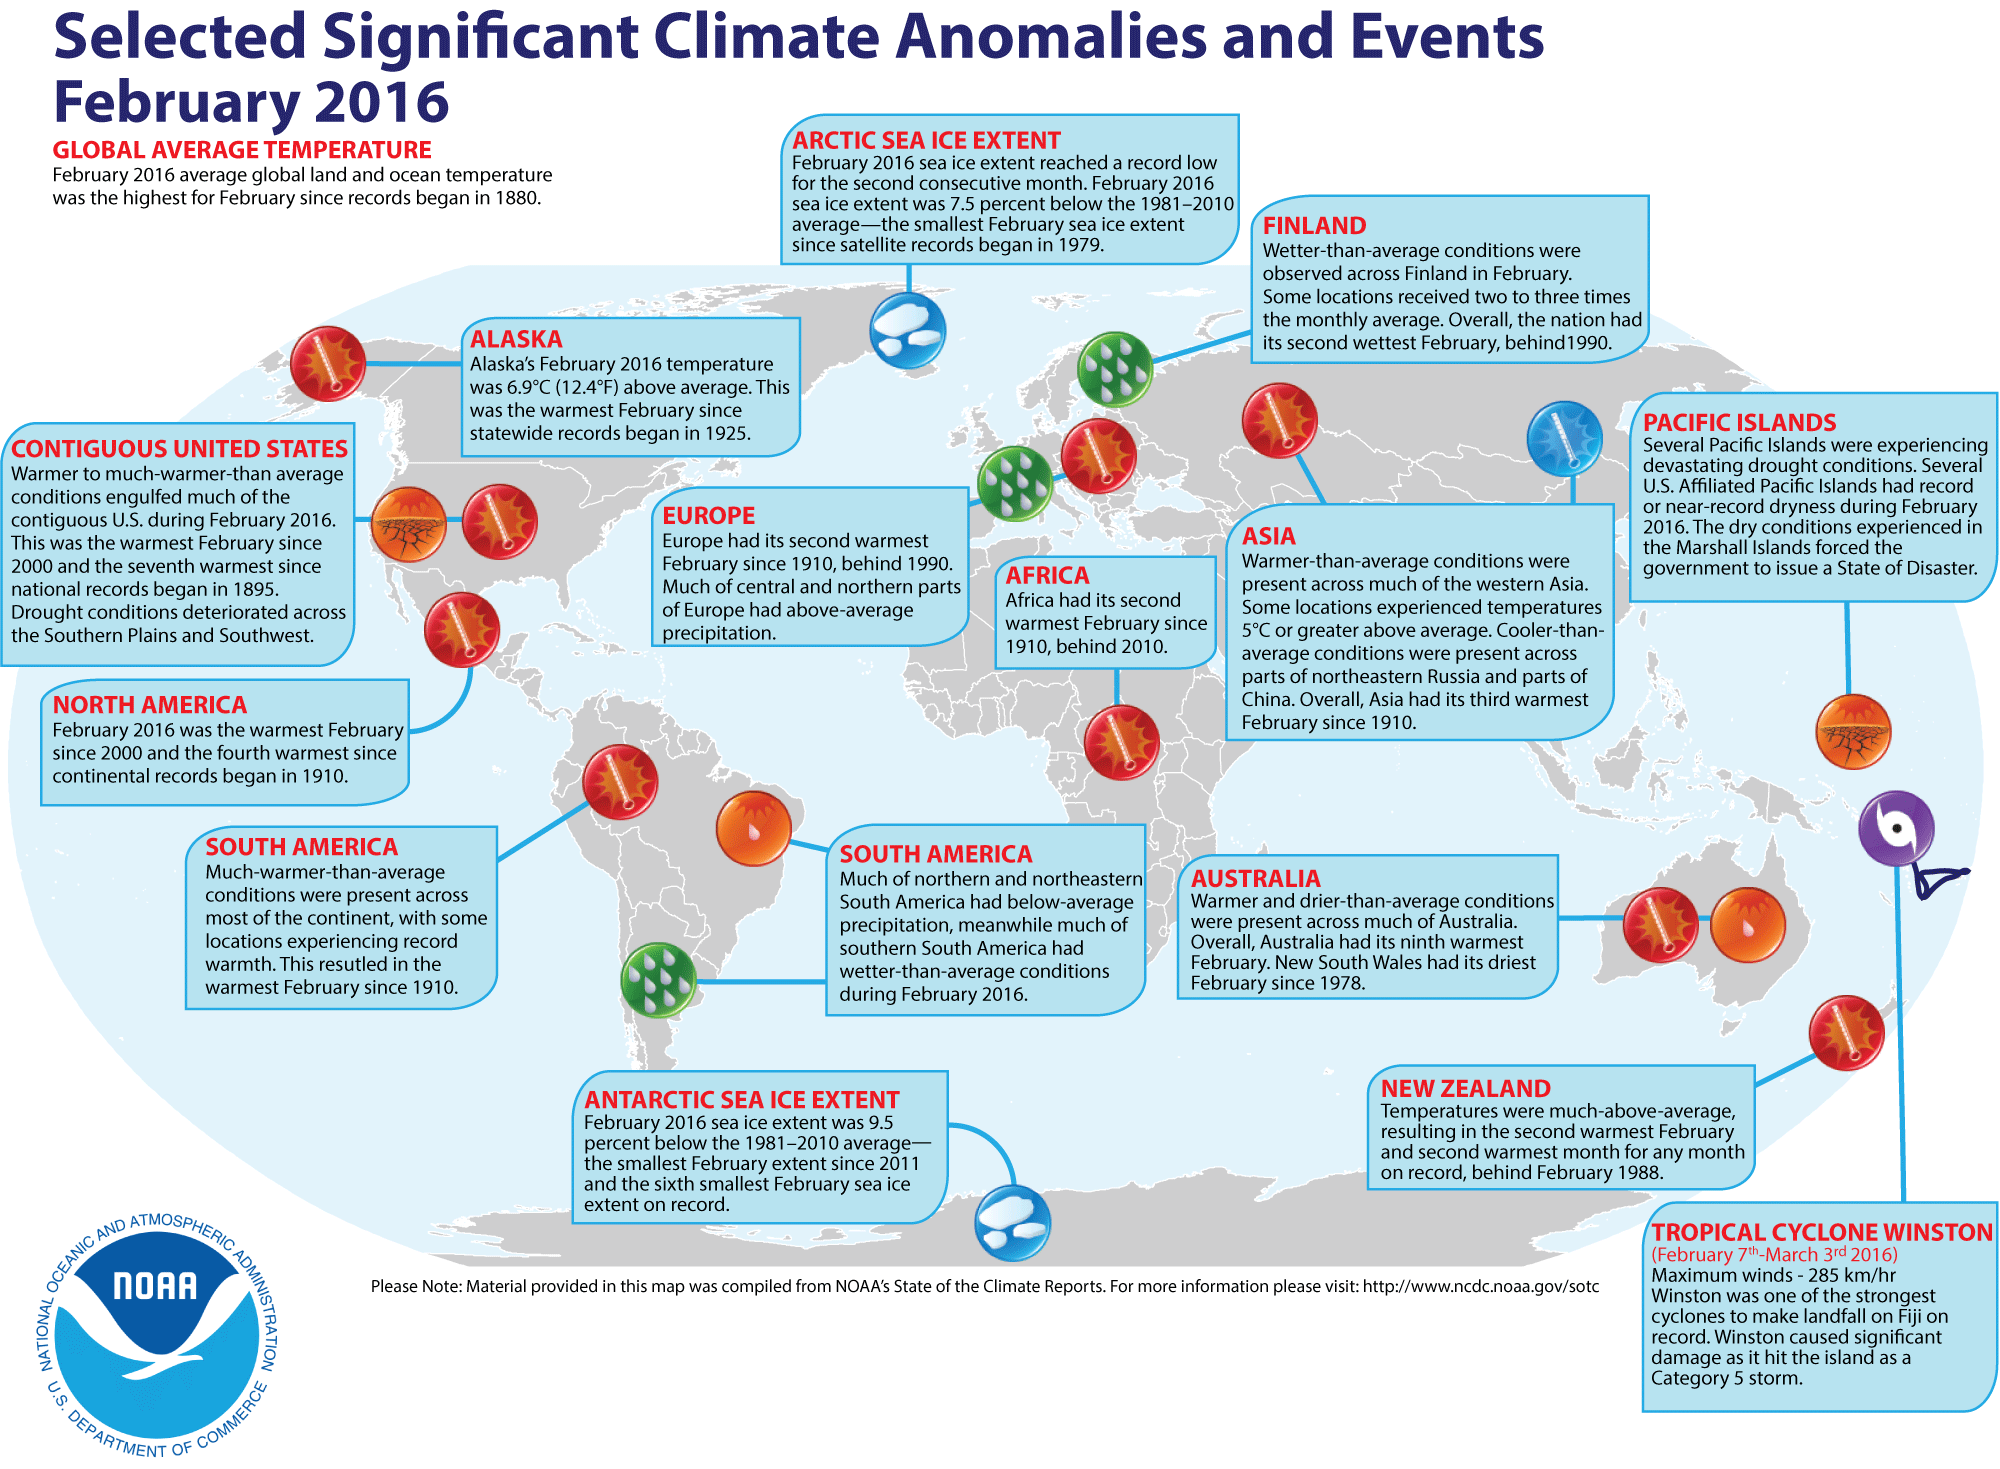 NOAA Selected Climate Anomalies and Events Map